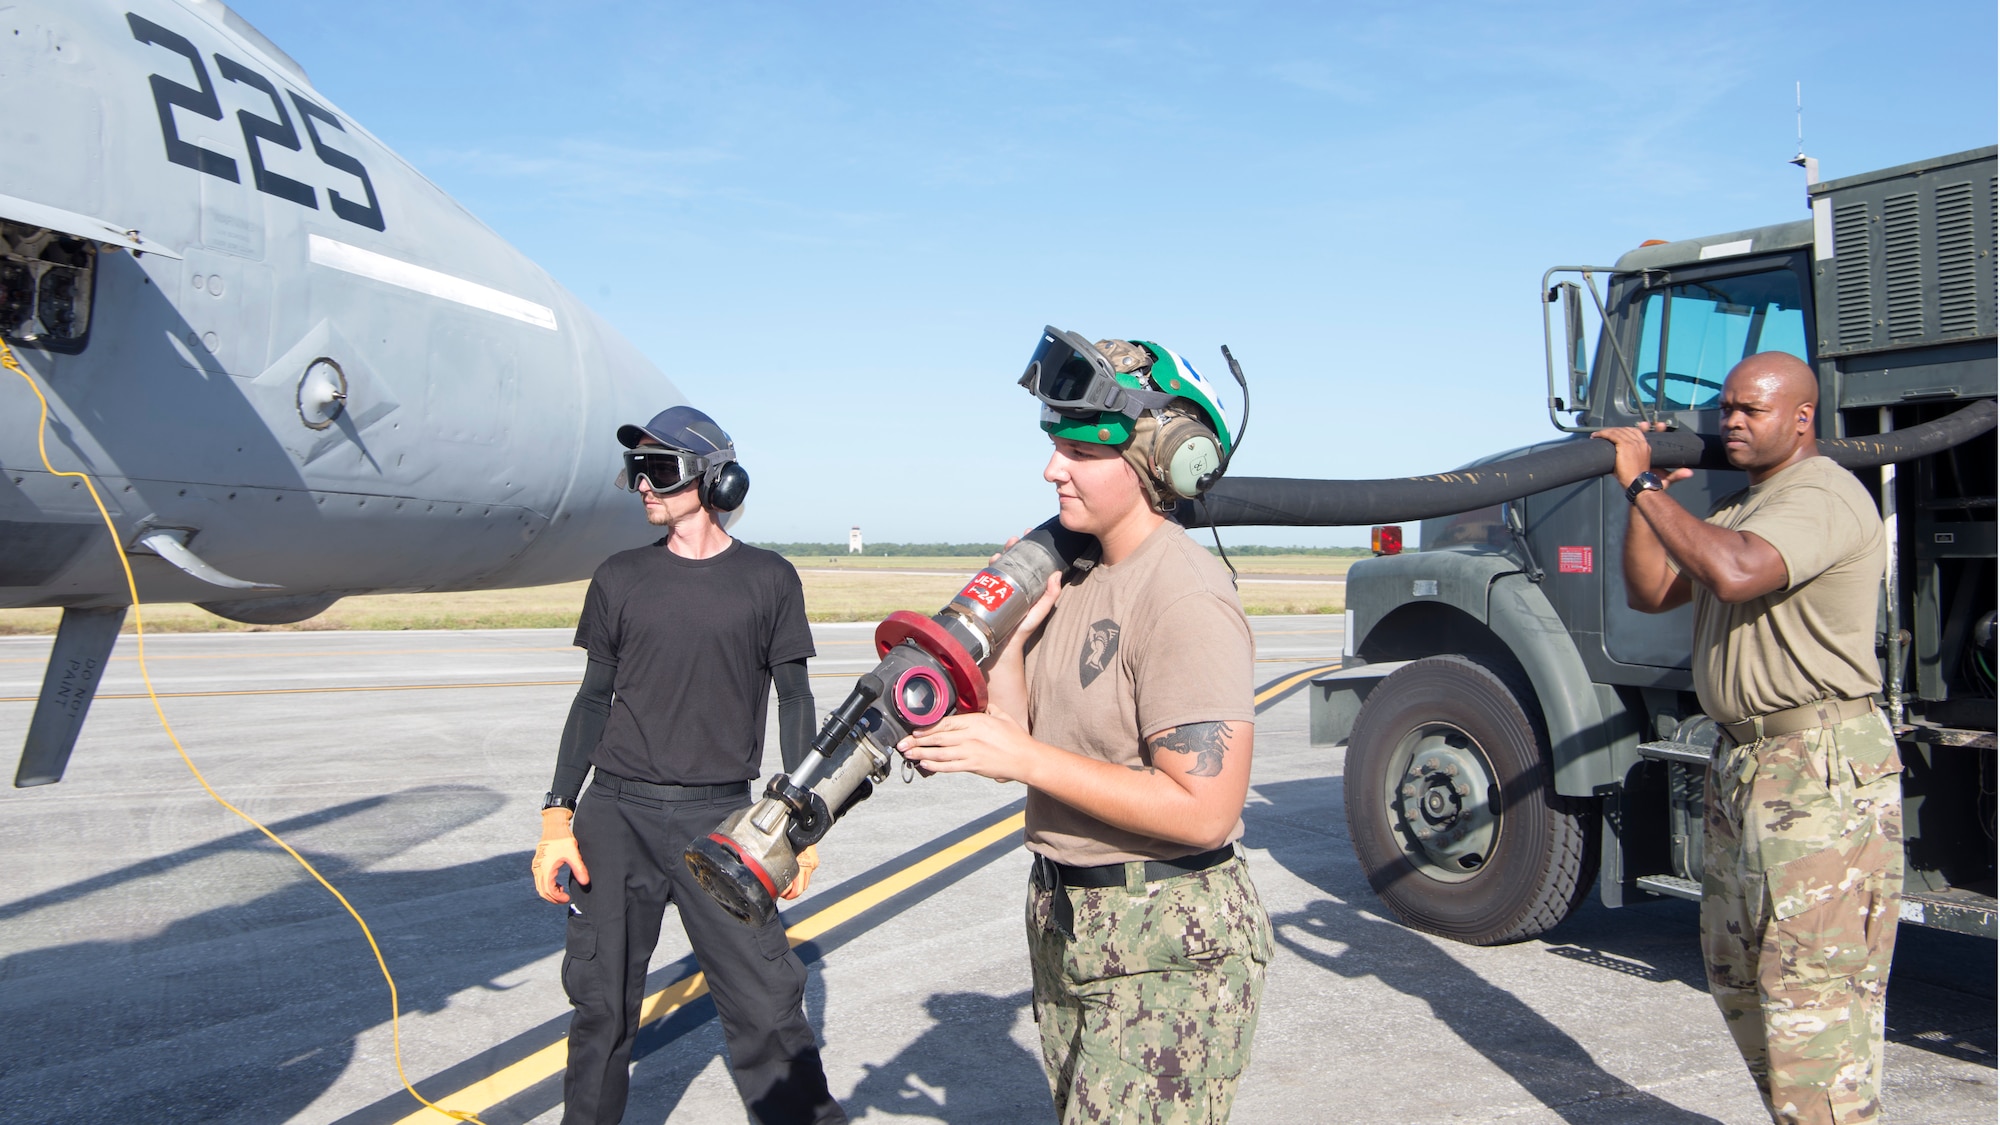 U.S. Navy aviation mechanics with the Strike Fighter Squadron (VFA) 106 from Naval Air Station Oceania, Va., and Tech. Sgt. Faelaun Onaolapo, right, a 6th Logistics Readiness Squadron petroleum, oil and lubricants NCO-in charge of fuels distribution, fuel a U.S. Navy F/A-18F Super Hornet aircraft from the VFA-106 at MacDill Air Force Base, Fla., Oct. 4, 2019.